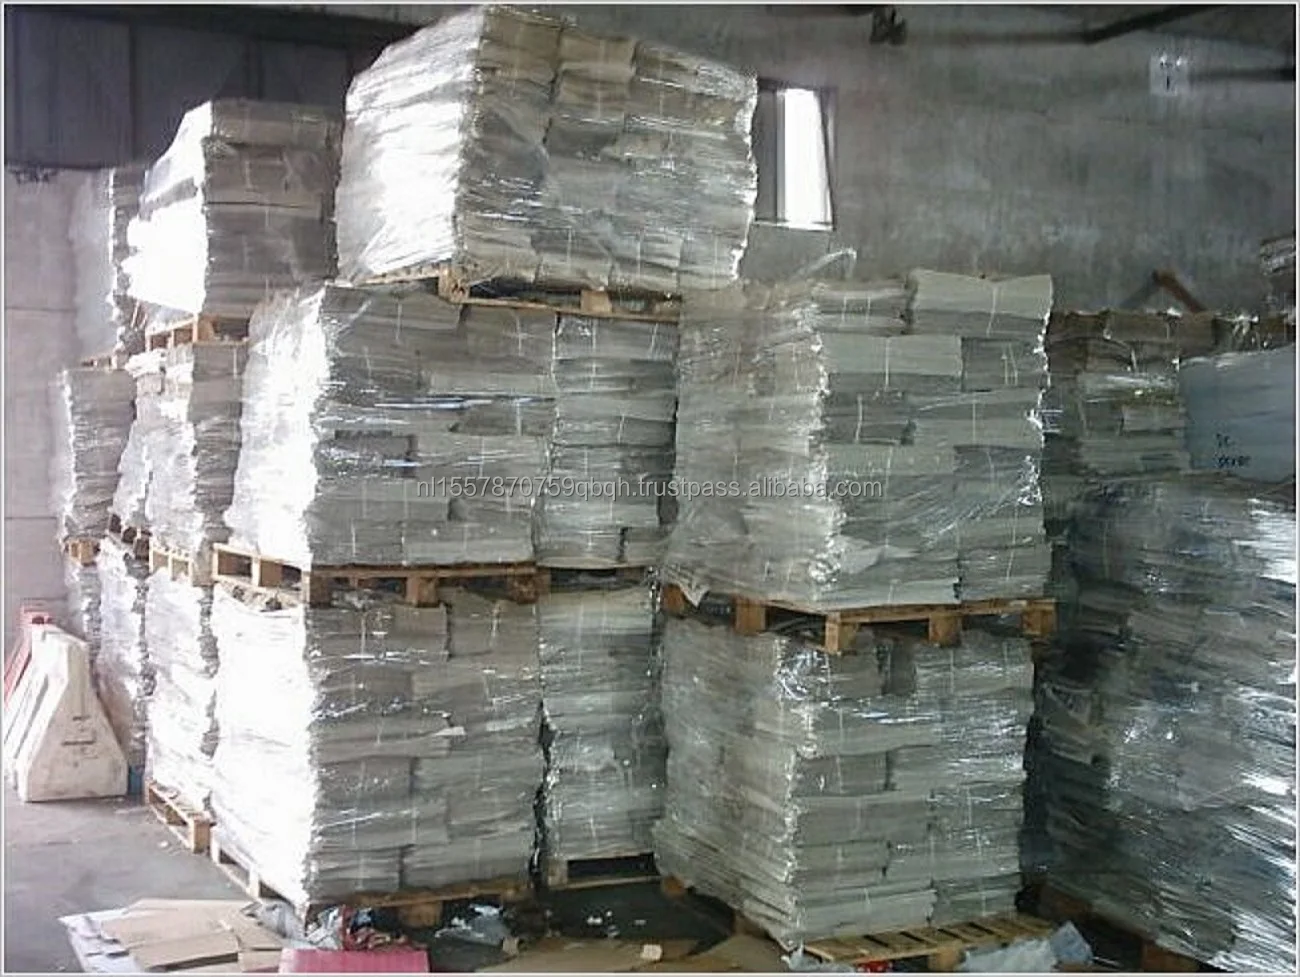 Best Price OINP 9 (OI / OIN / Grade 9 Over Issued Newspaper / Unsold Newspaper) Waste Paper Clean ONP Paper Scrap